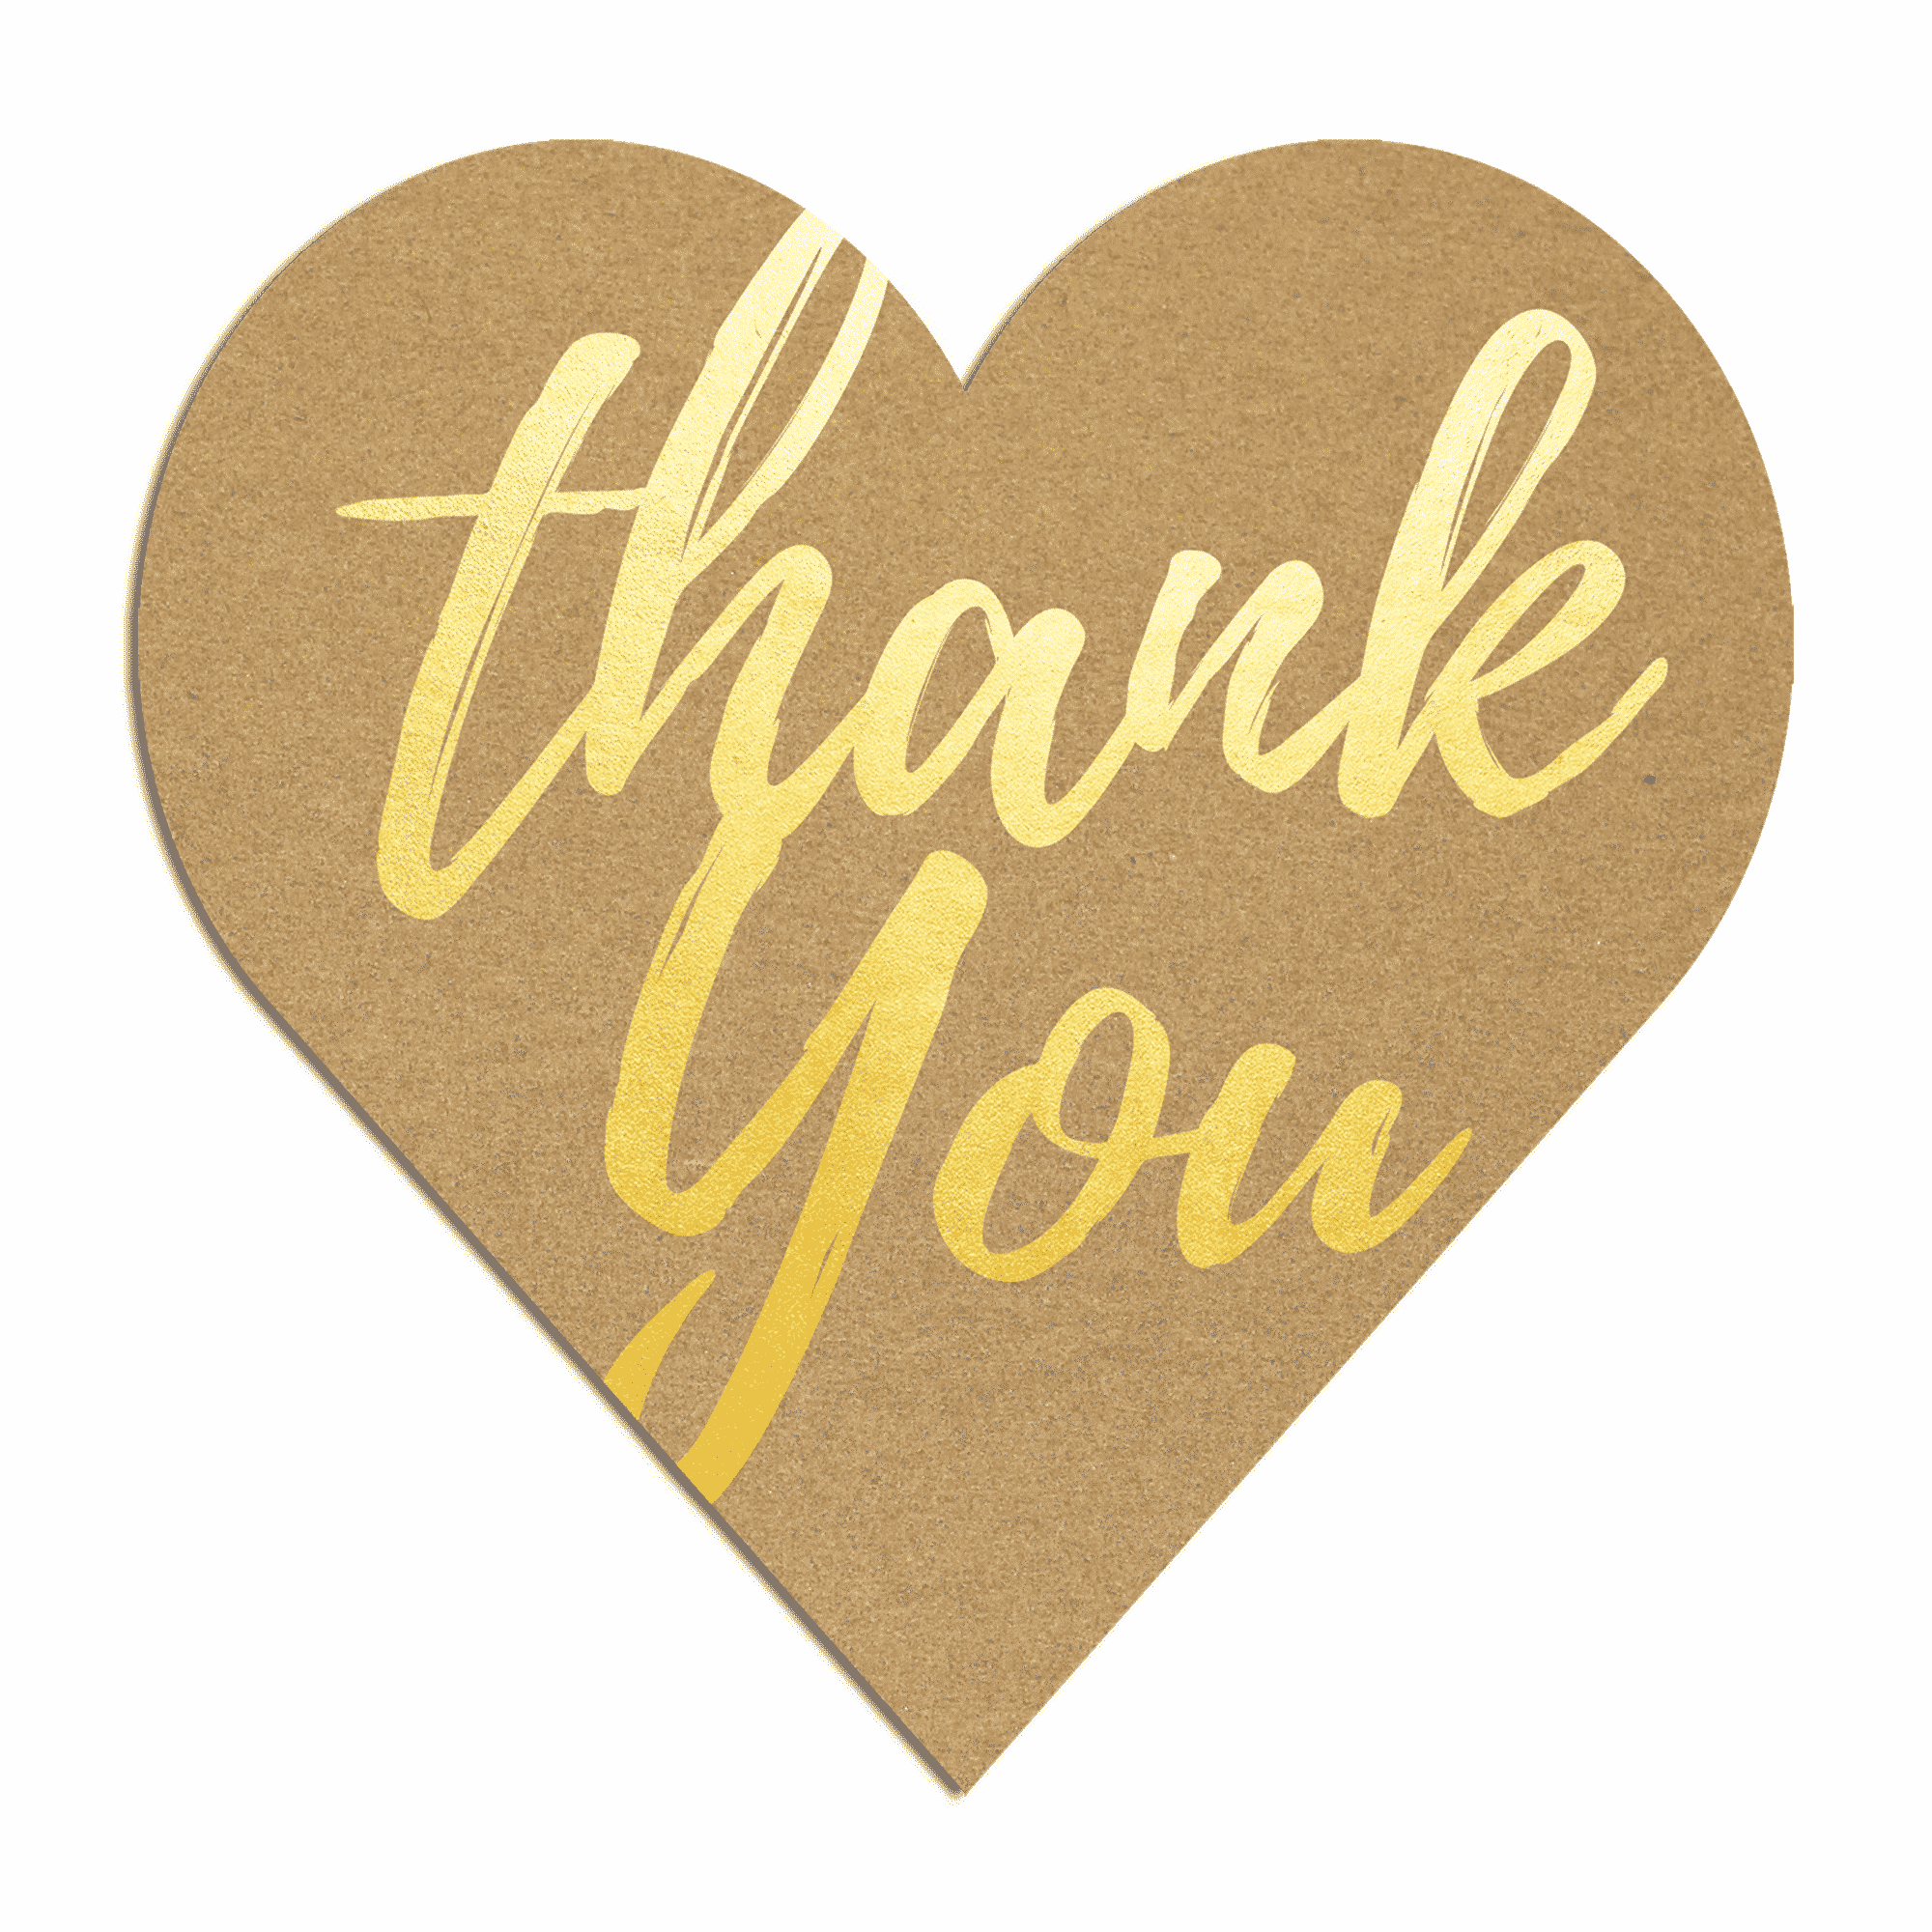 **FREE SHIPPING!** 1.5" Gold Foil Heart Self Adhesive Thank You Stickers